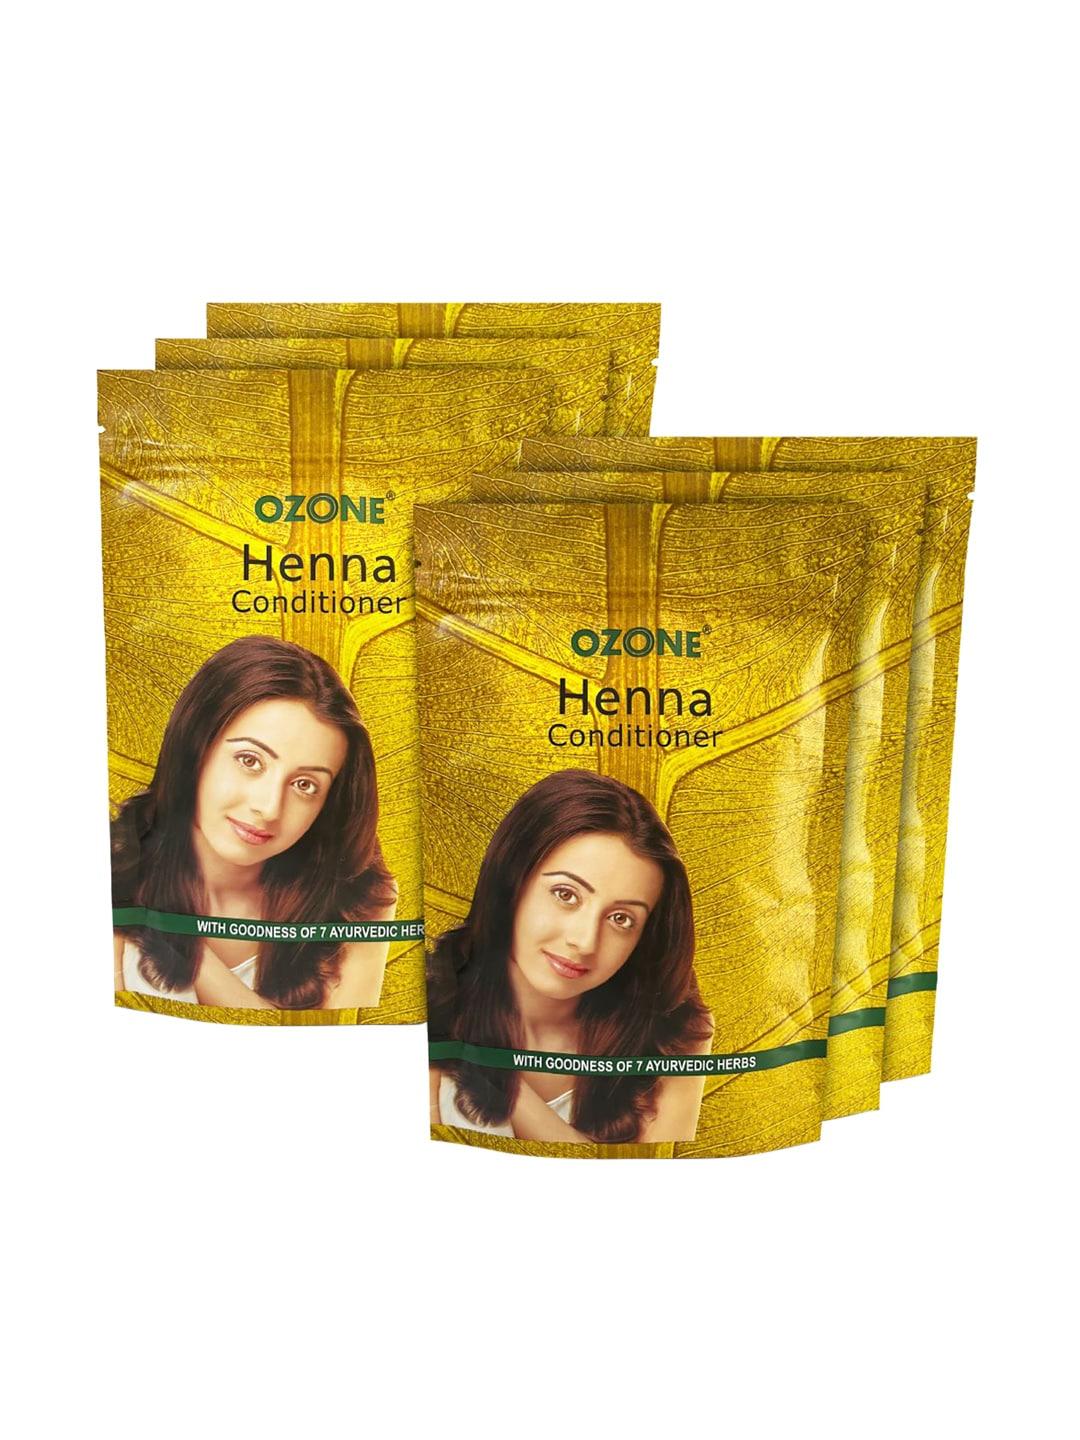 ozone pack of 6 henna conditioner with 7 ayurvedic herbs - 200 g each